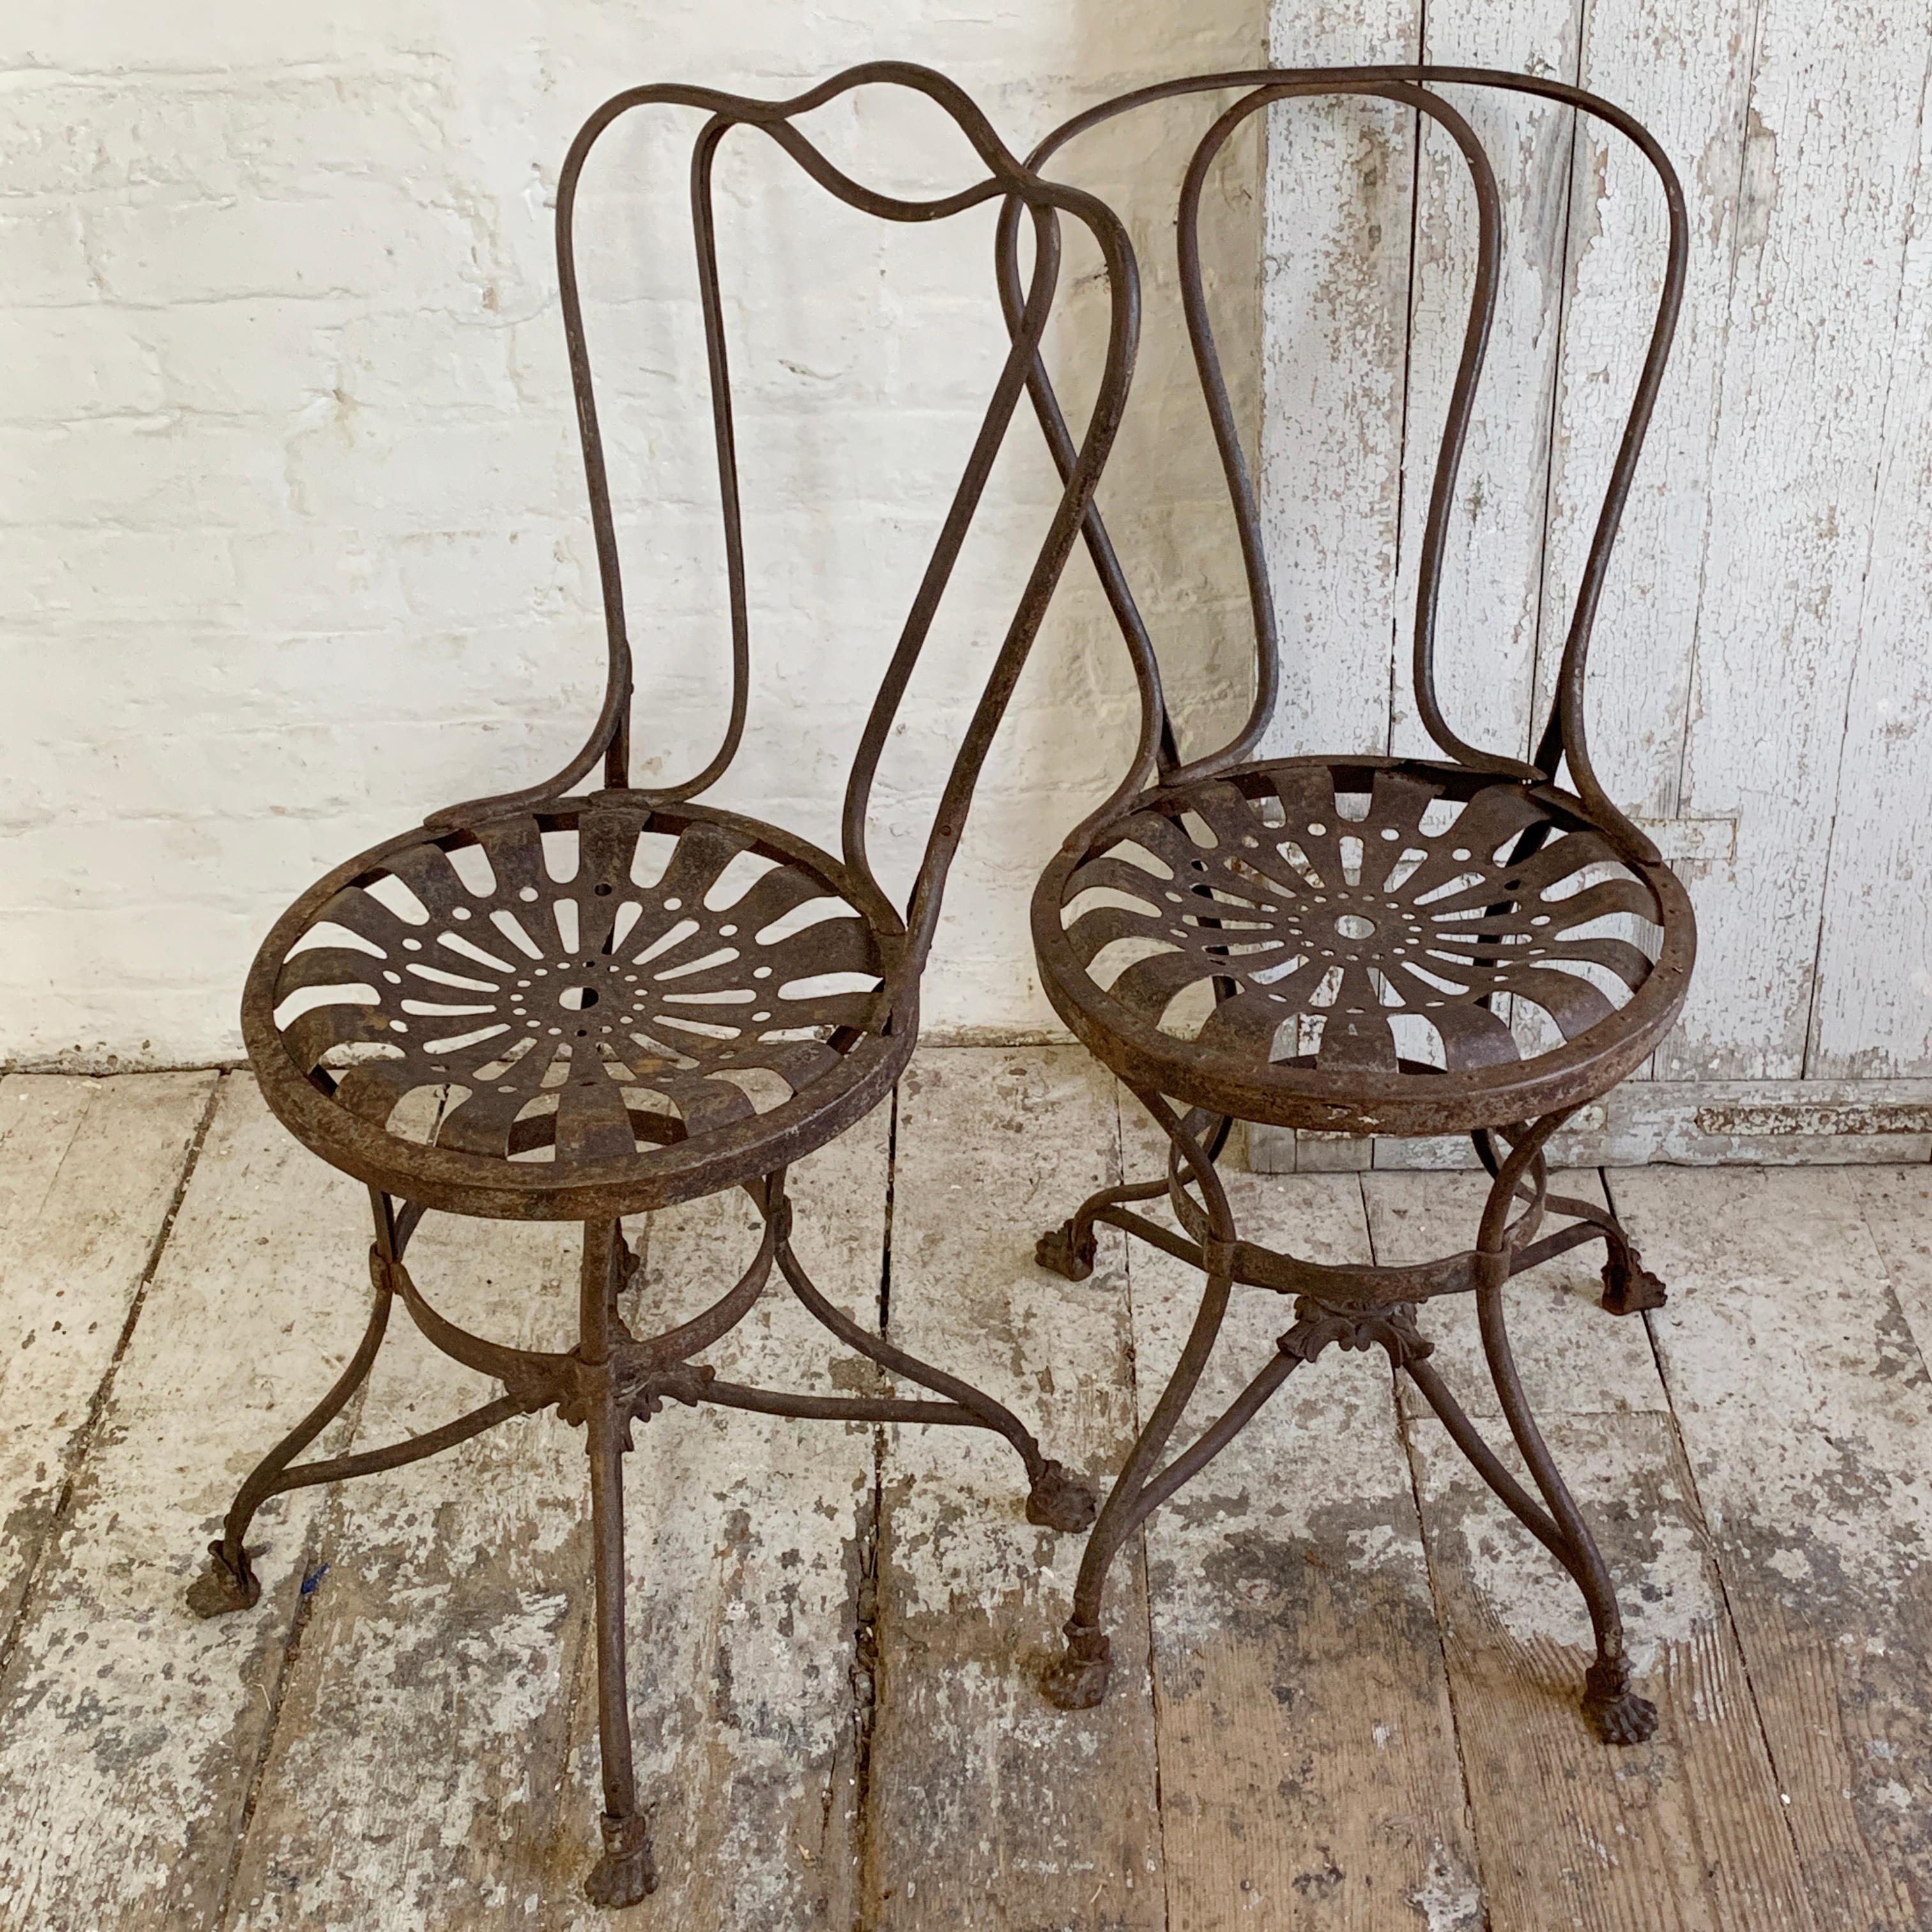 Late 19th Century French Grassin Arras Garden Chairs 3